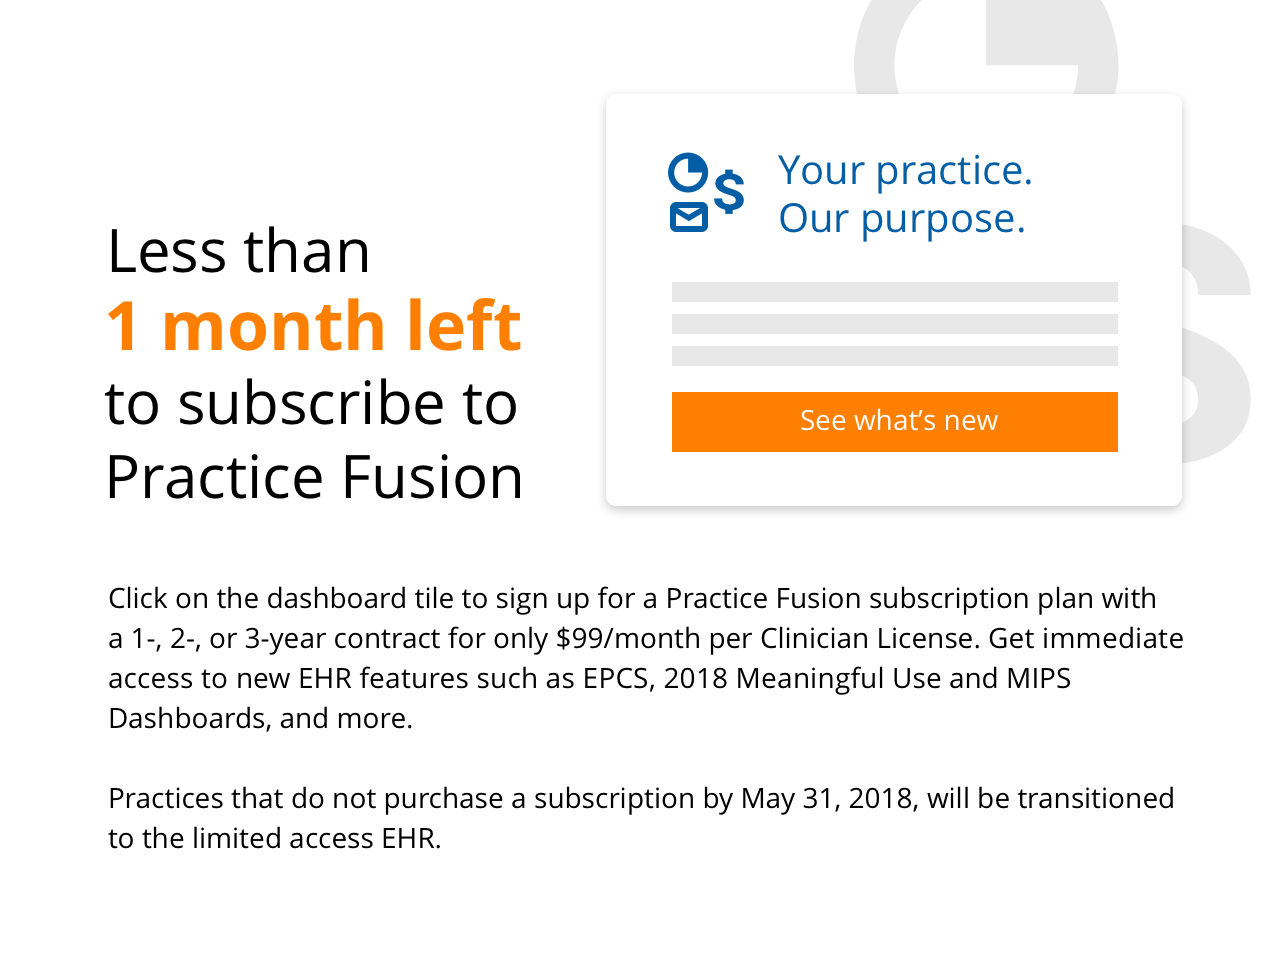 Click on the dasboard tile to sign up for a Practice Fusion subscription plan with a 1-, 2-, or 3-year contract for onl $99/month per Clinician Liscense. Get immediate access to new EHR features such as EPCS, 2018 Meaningful Use and MIPS Dashboards, and more.  Practices that do not purchase a subscription by May 31, 2018, will be transitioned to the limited access EHR.